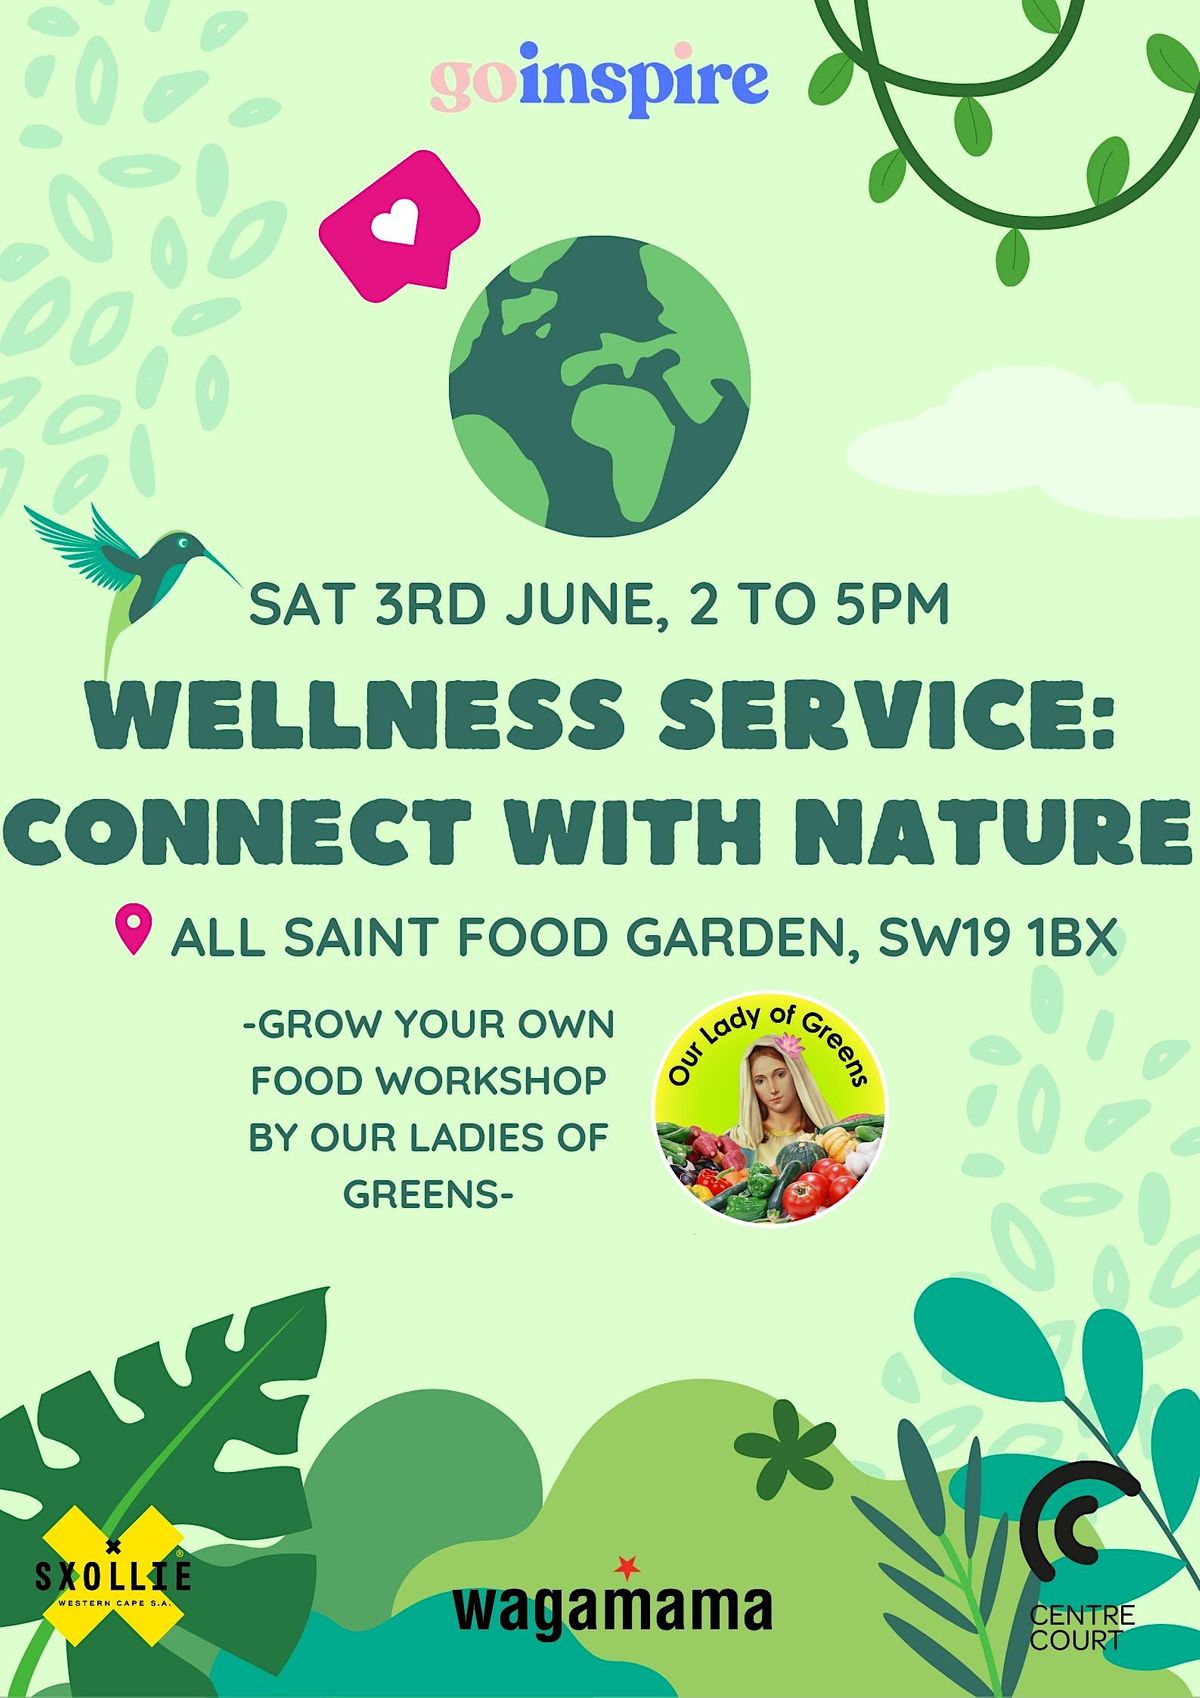 Wellness Service: Connect with Nature + Wagamama Buffet